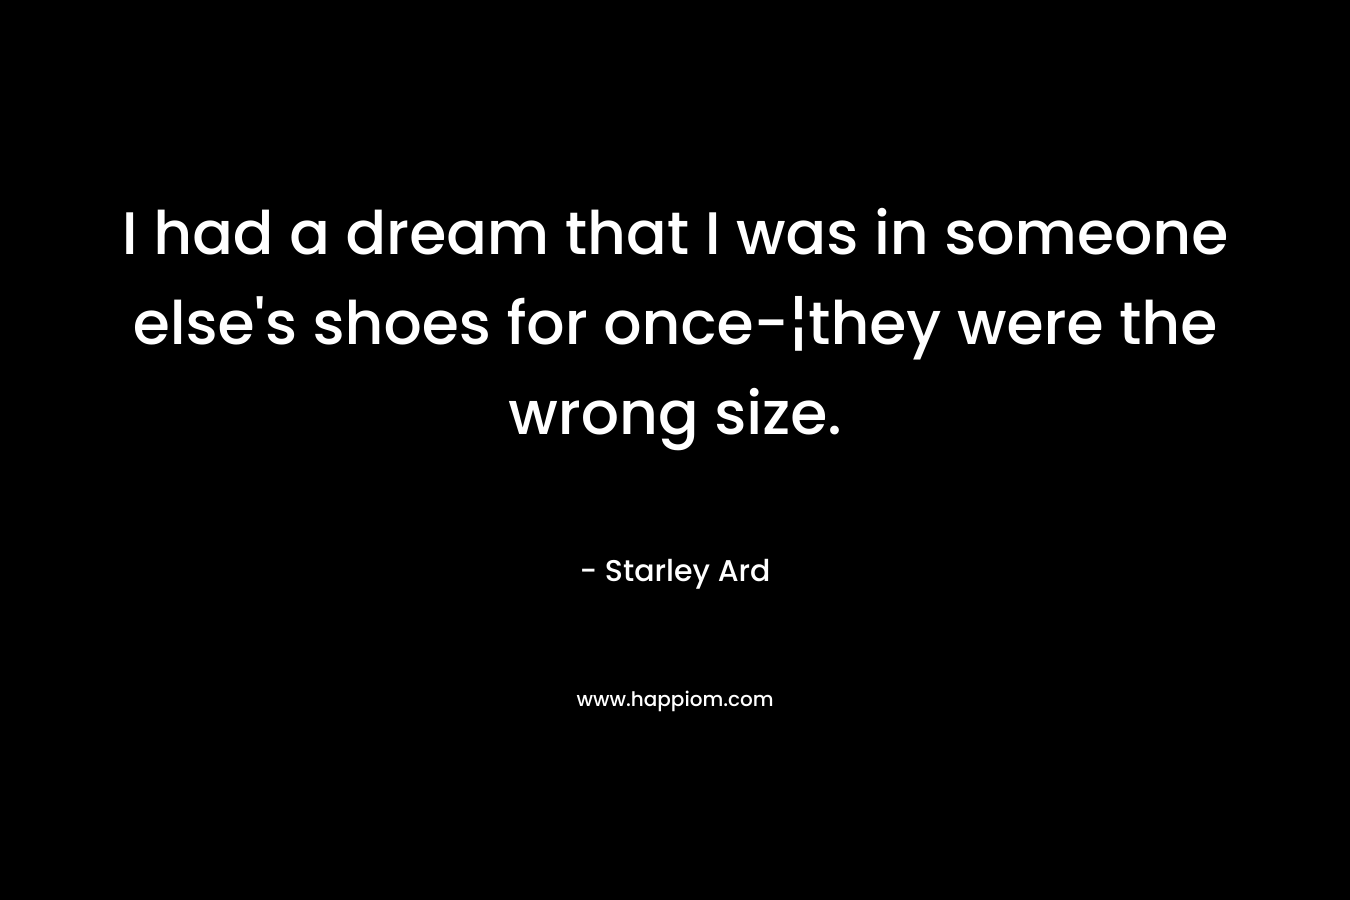 I had a dream that I was in someone else’s shoes for once-¦they were the wrong size. – Starley Ard